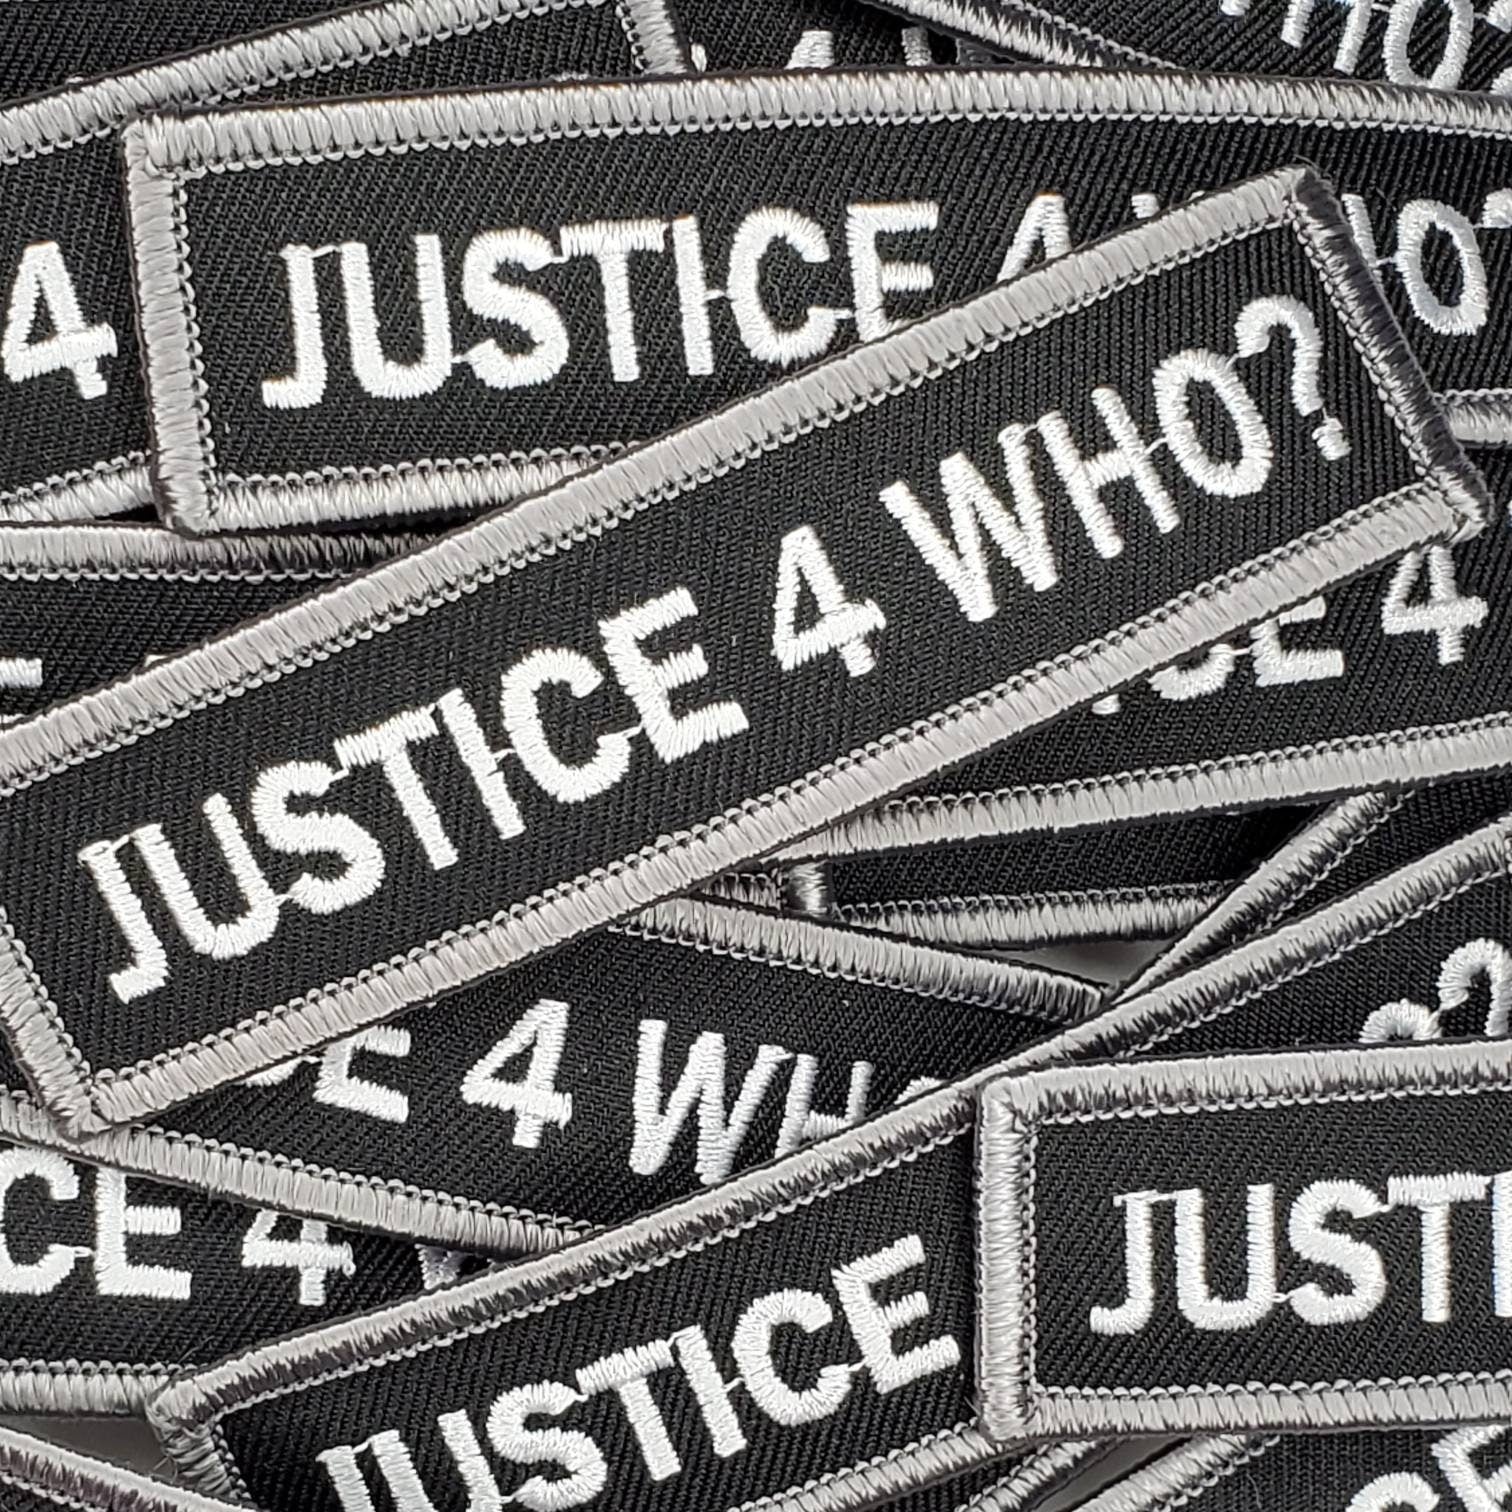 Cool, Statement Patch "Justice 4 Who?" Iron-On Embroidered Patch; Rights Movement Patch